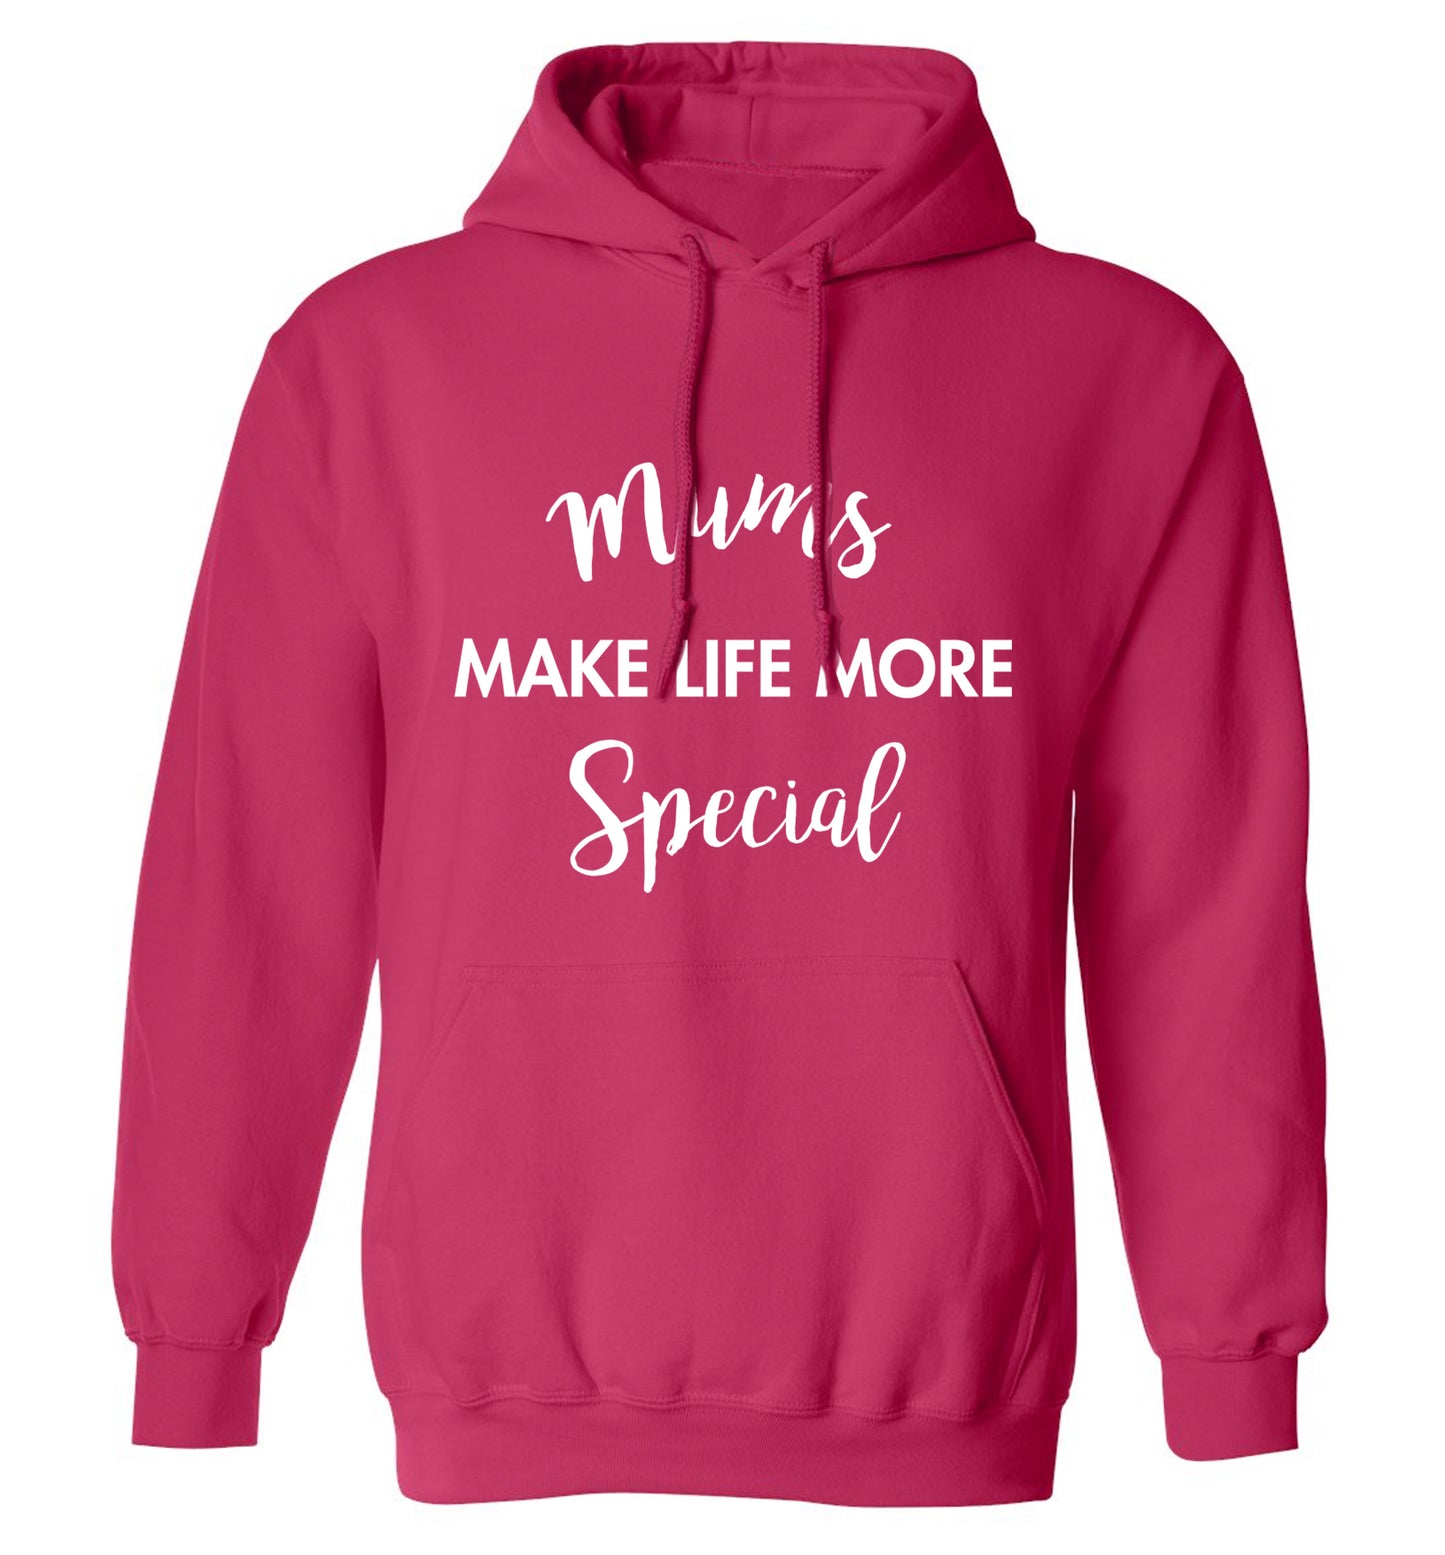 Mum's make life more special adults unisex pink hoodie 2XL